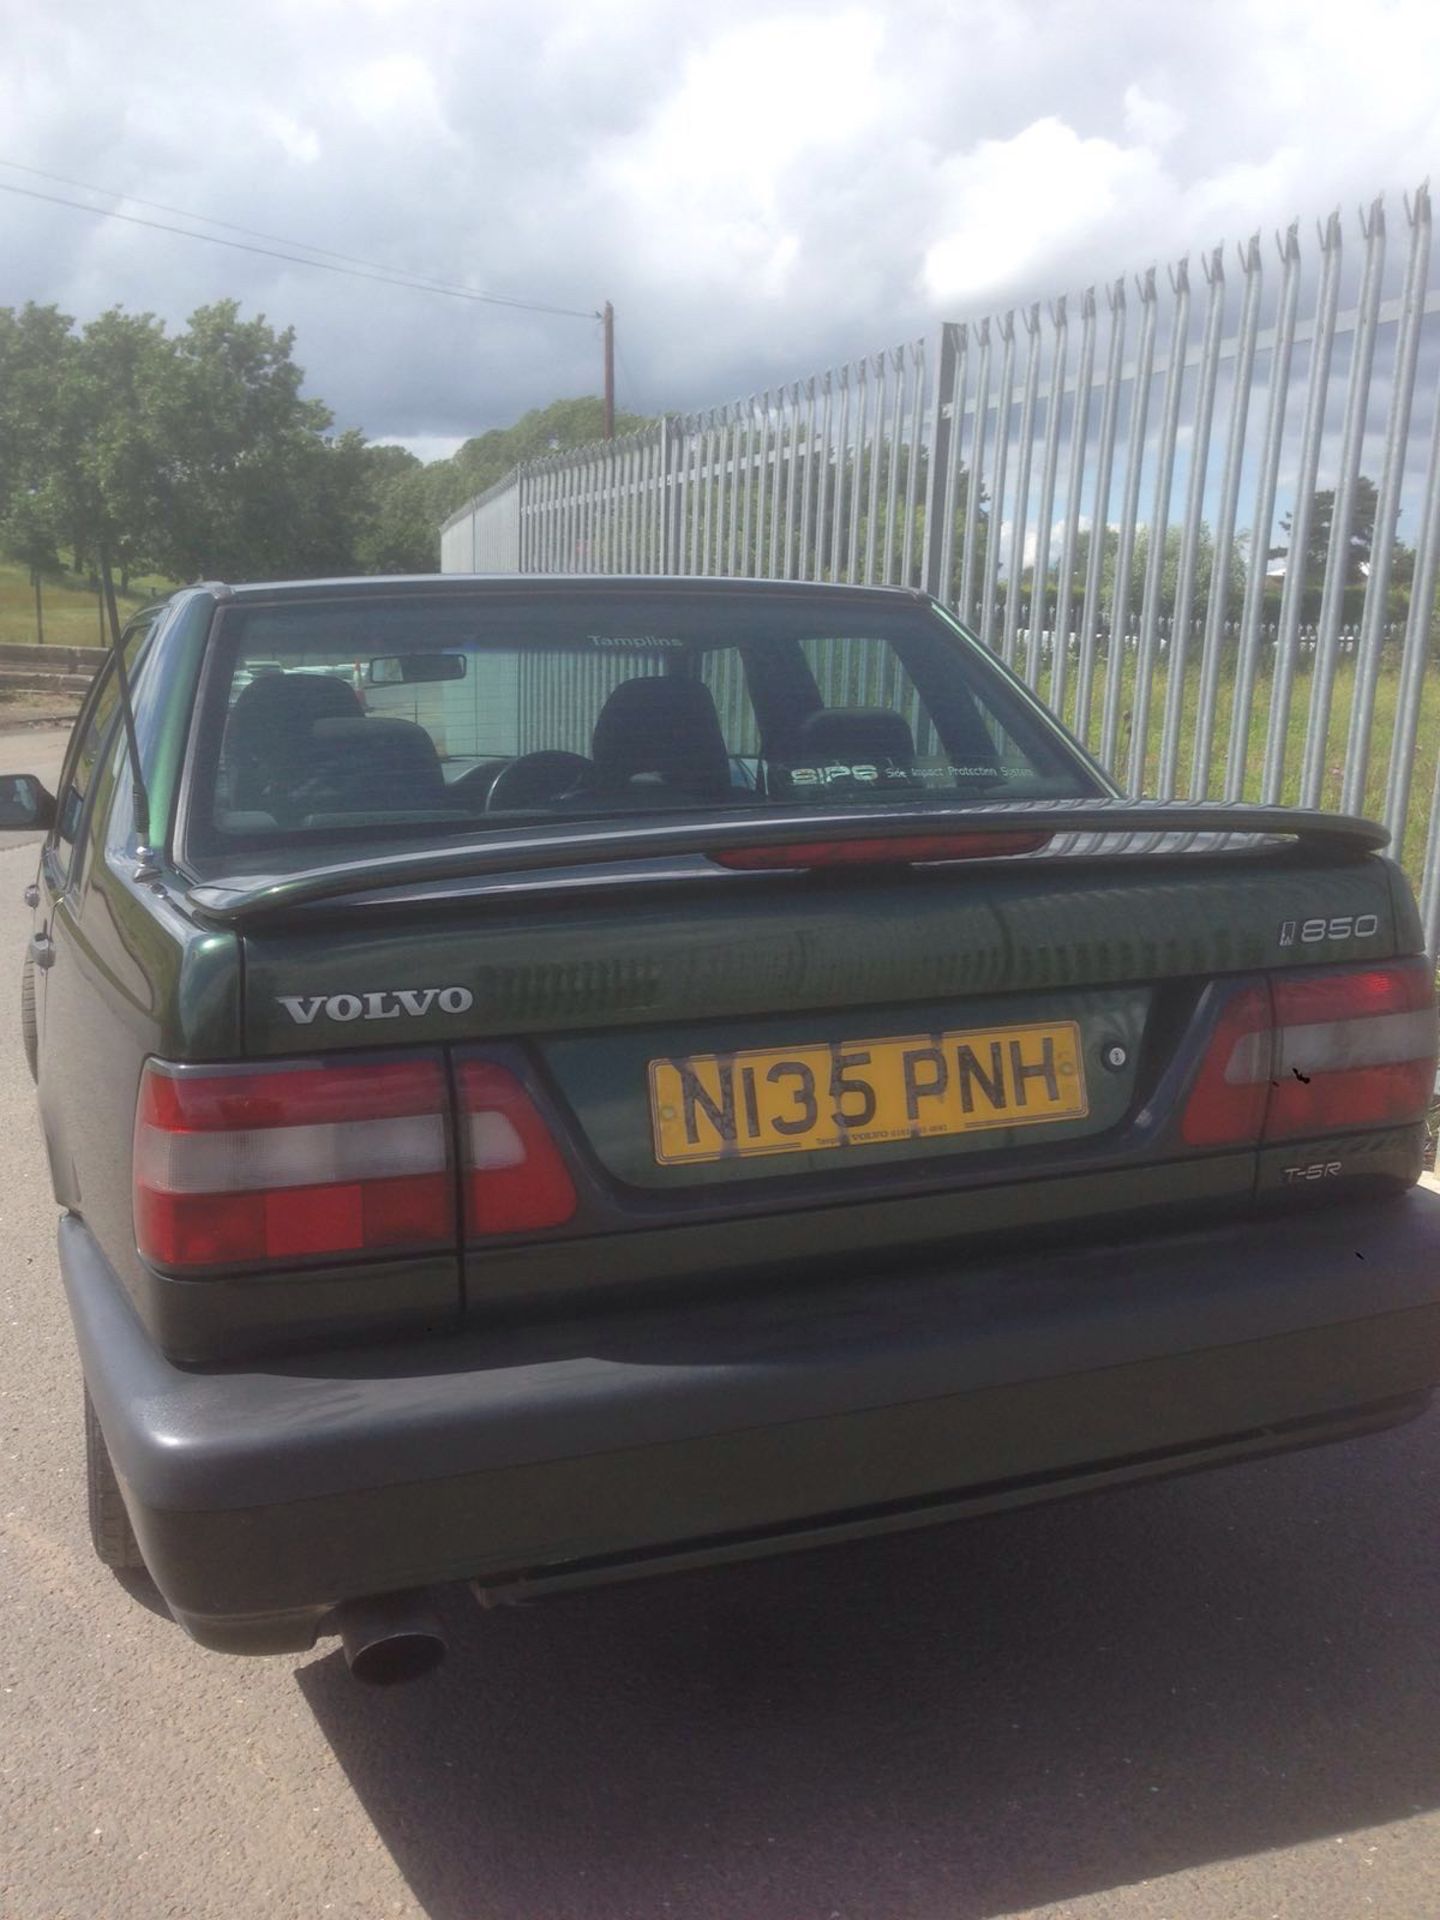 VOLVO T5-R saloon auto, 1995/N. olive green, - Image 3 of 18